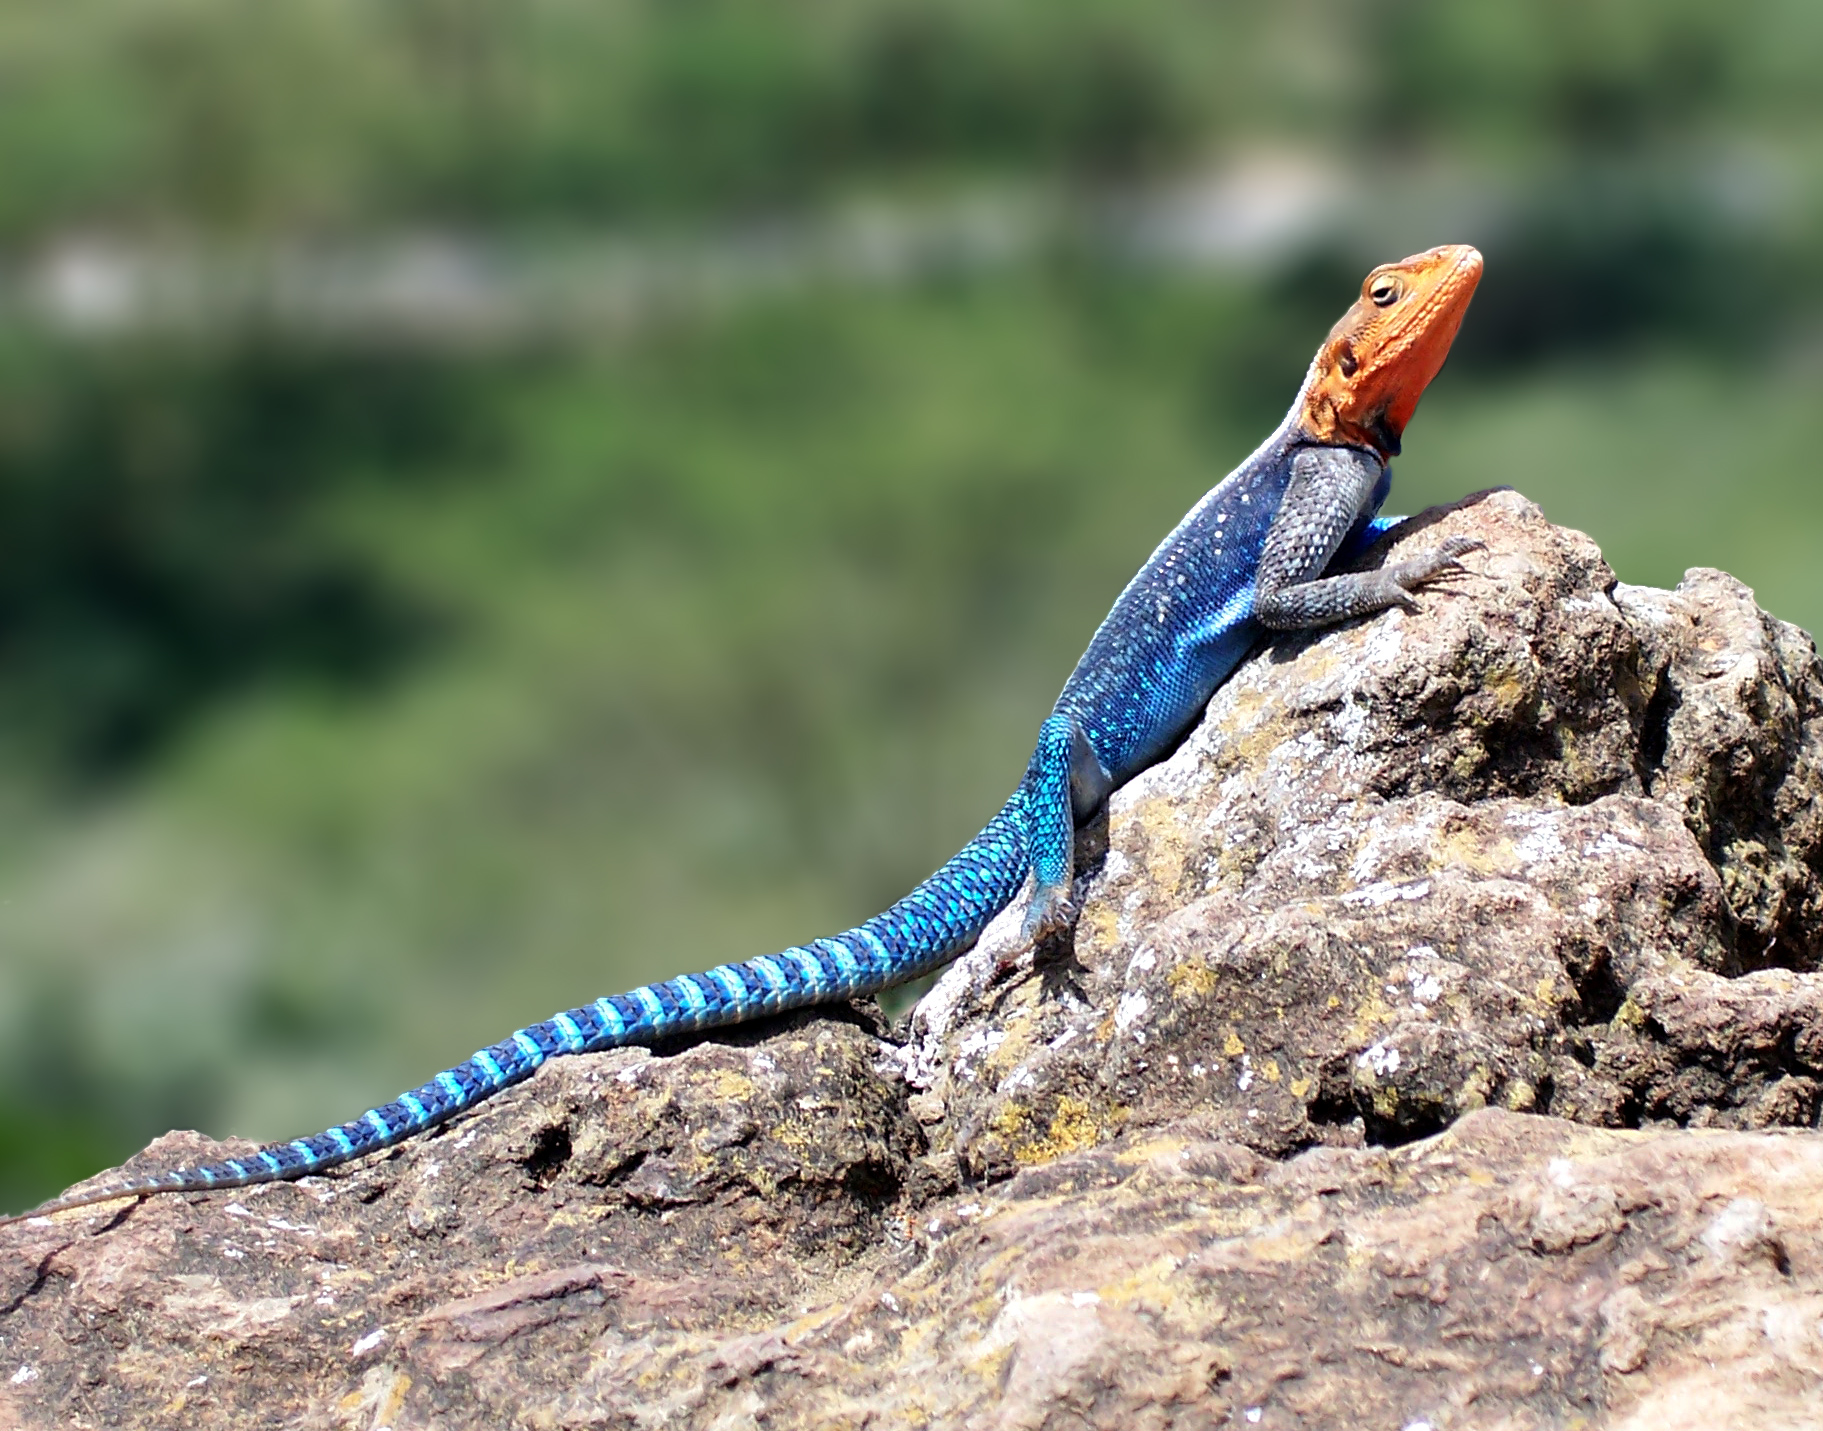 HQ Agama Wallpapers | File 1134.51Kb